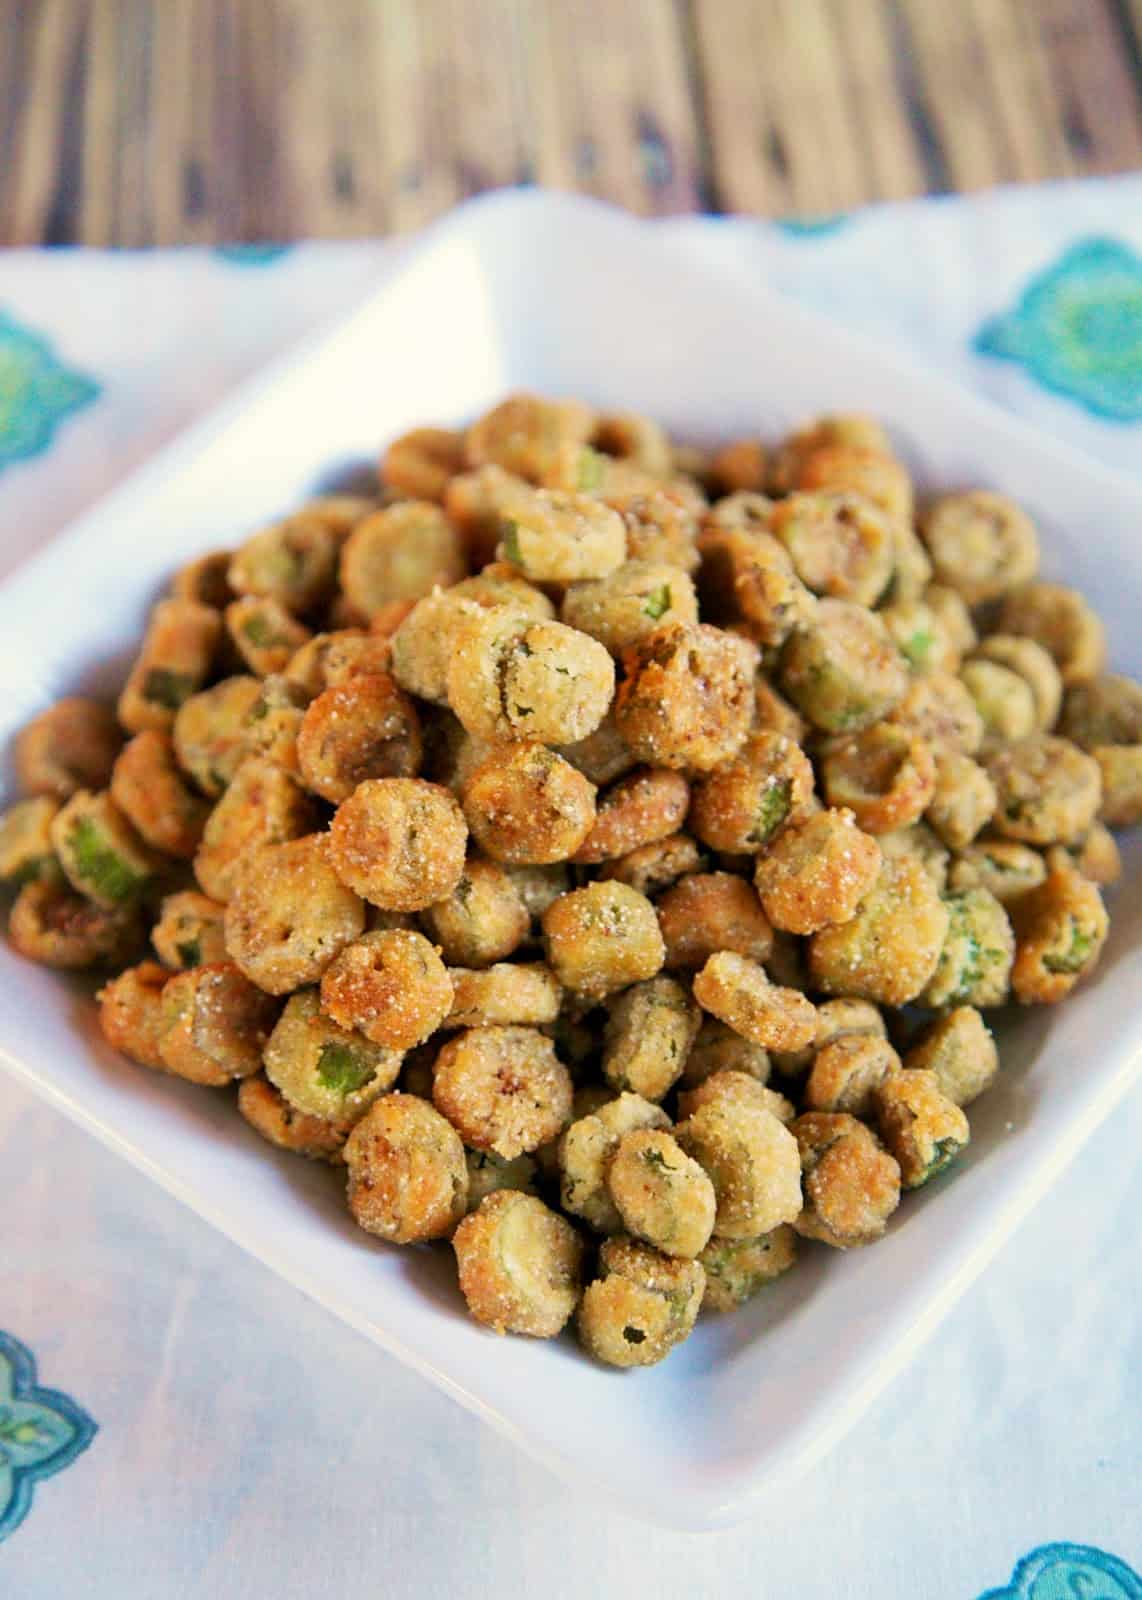 2-Ingredient Fried Okra - my favorite vegetable! SO good. I can eat the whole batch of this yummy, crunchy okra. My absolute fav!